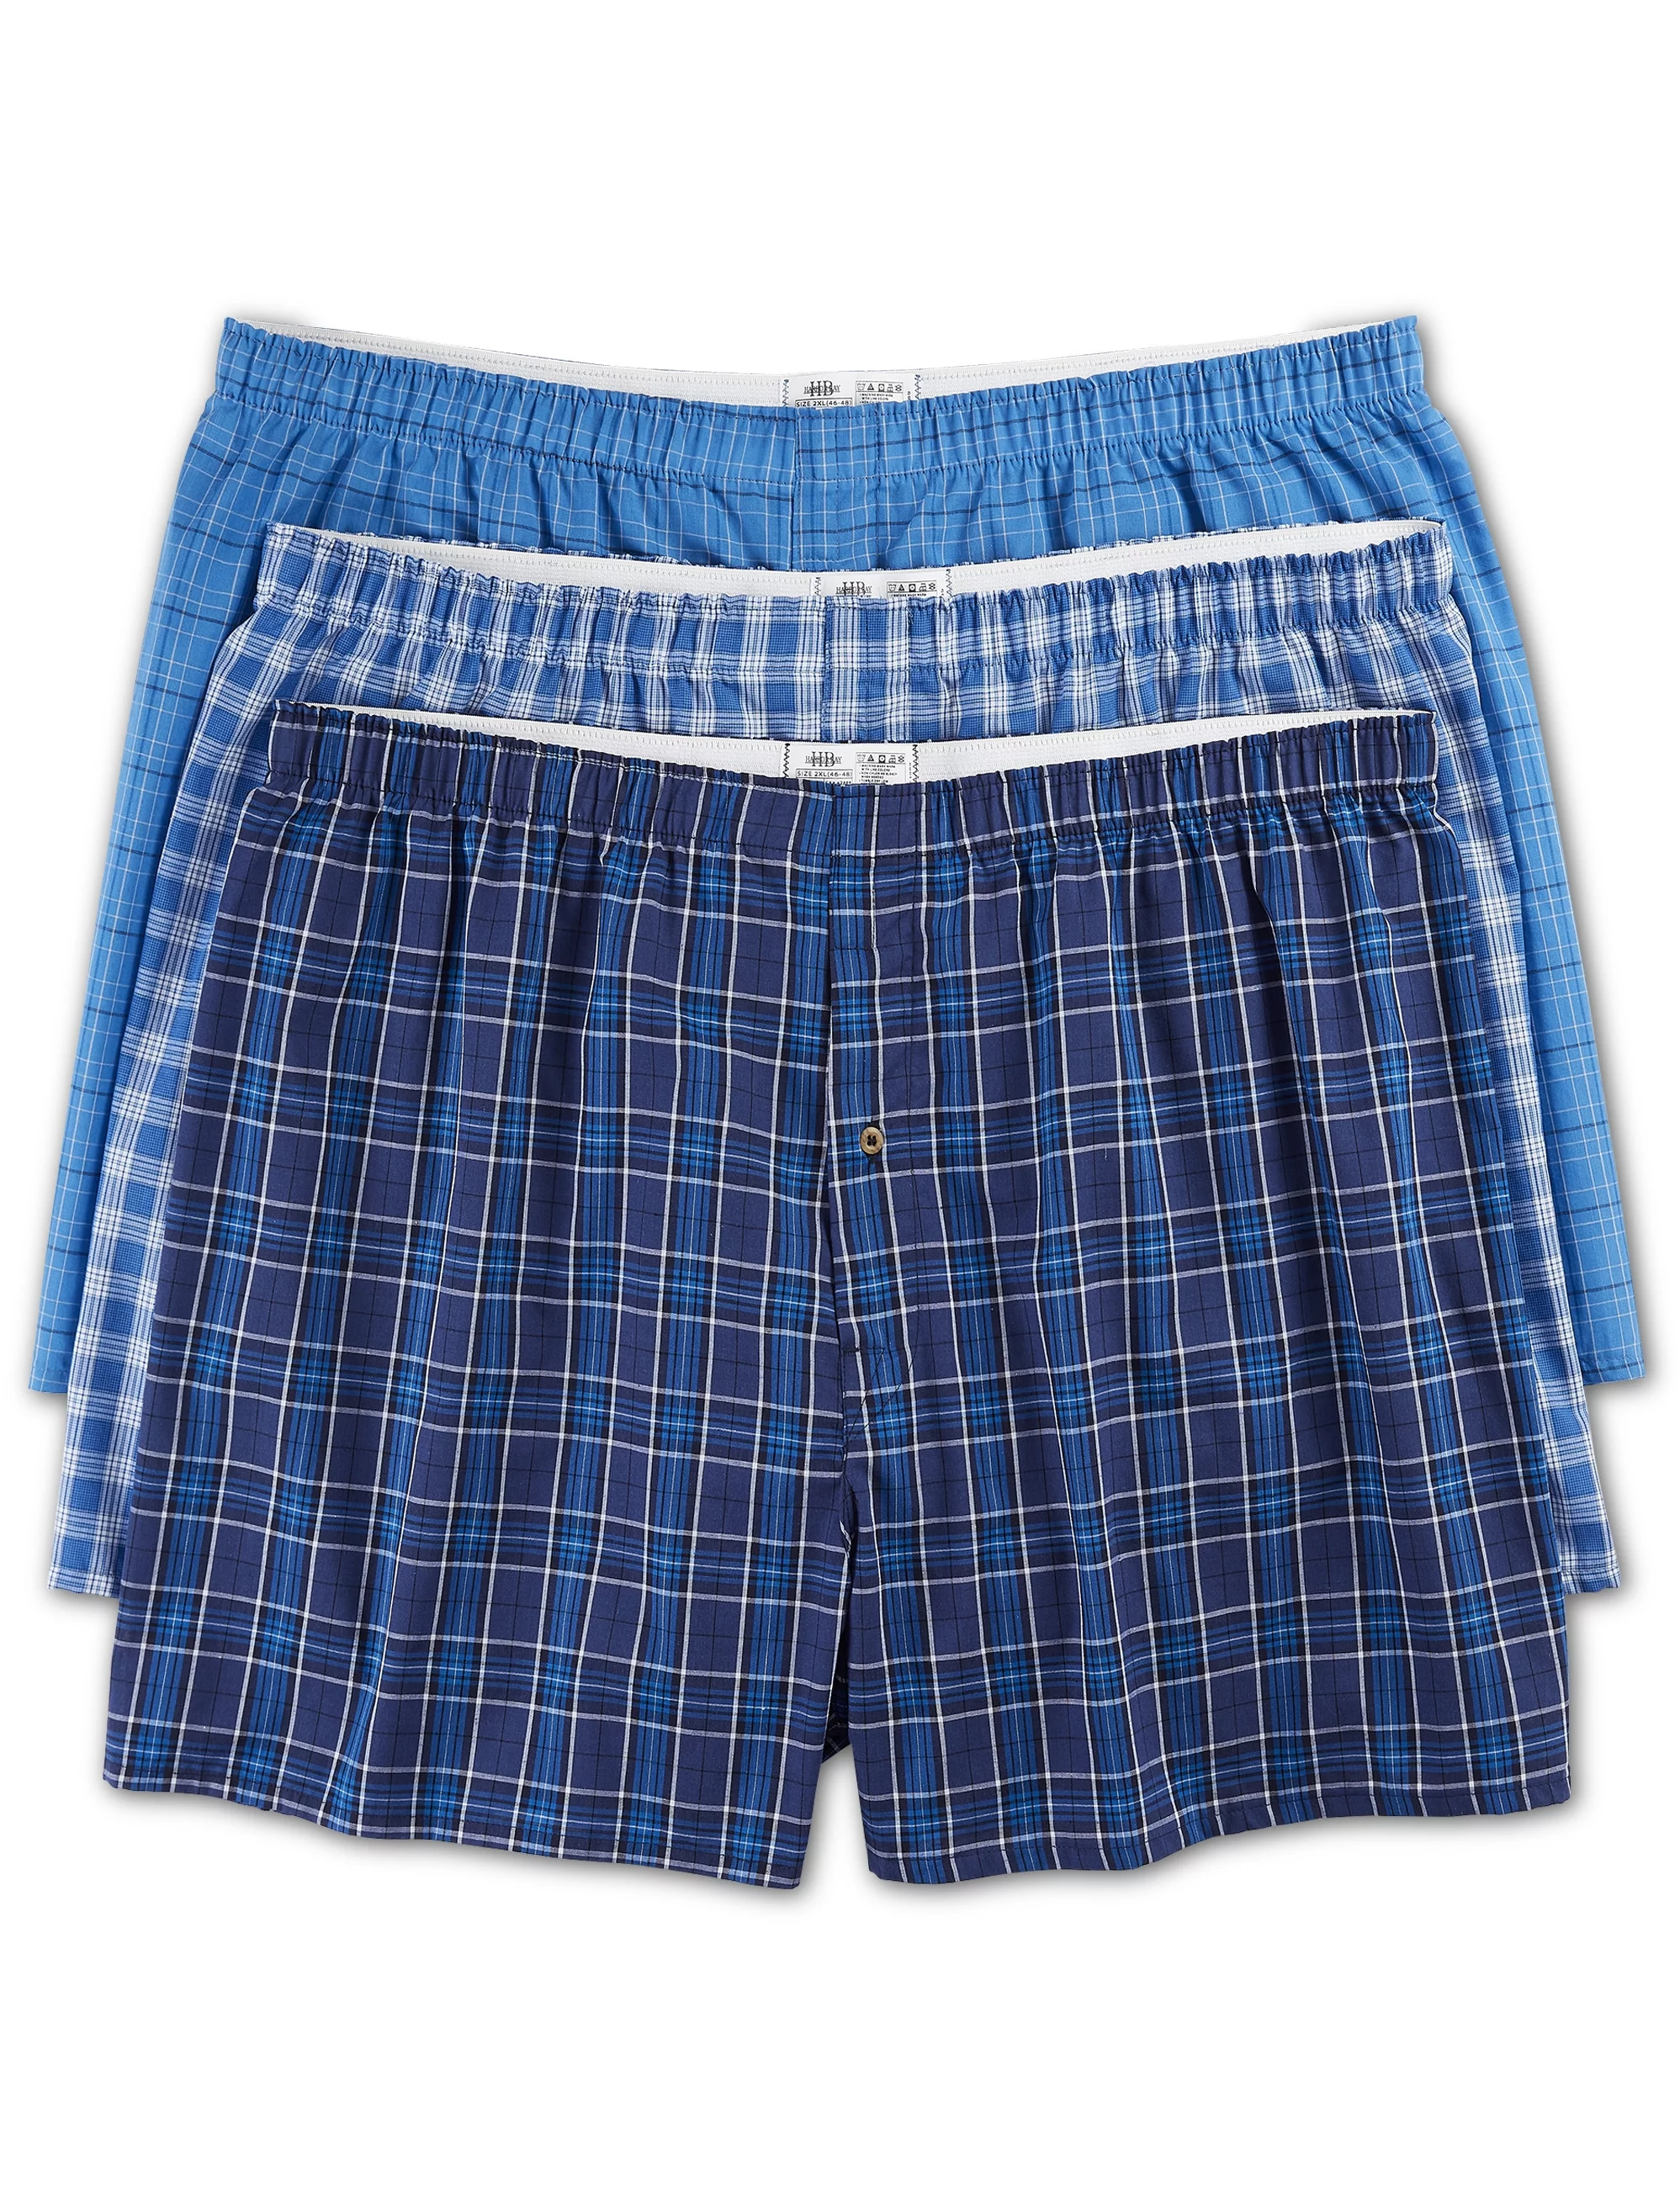 Harbor Bay by DXL Big and Tall Men's Plaid Woven Boxers, Blue, 2XL, Pack of 3